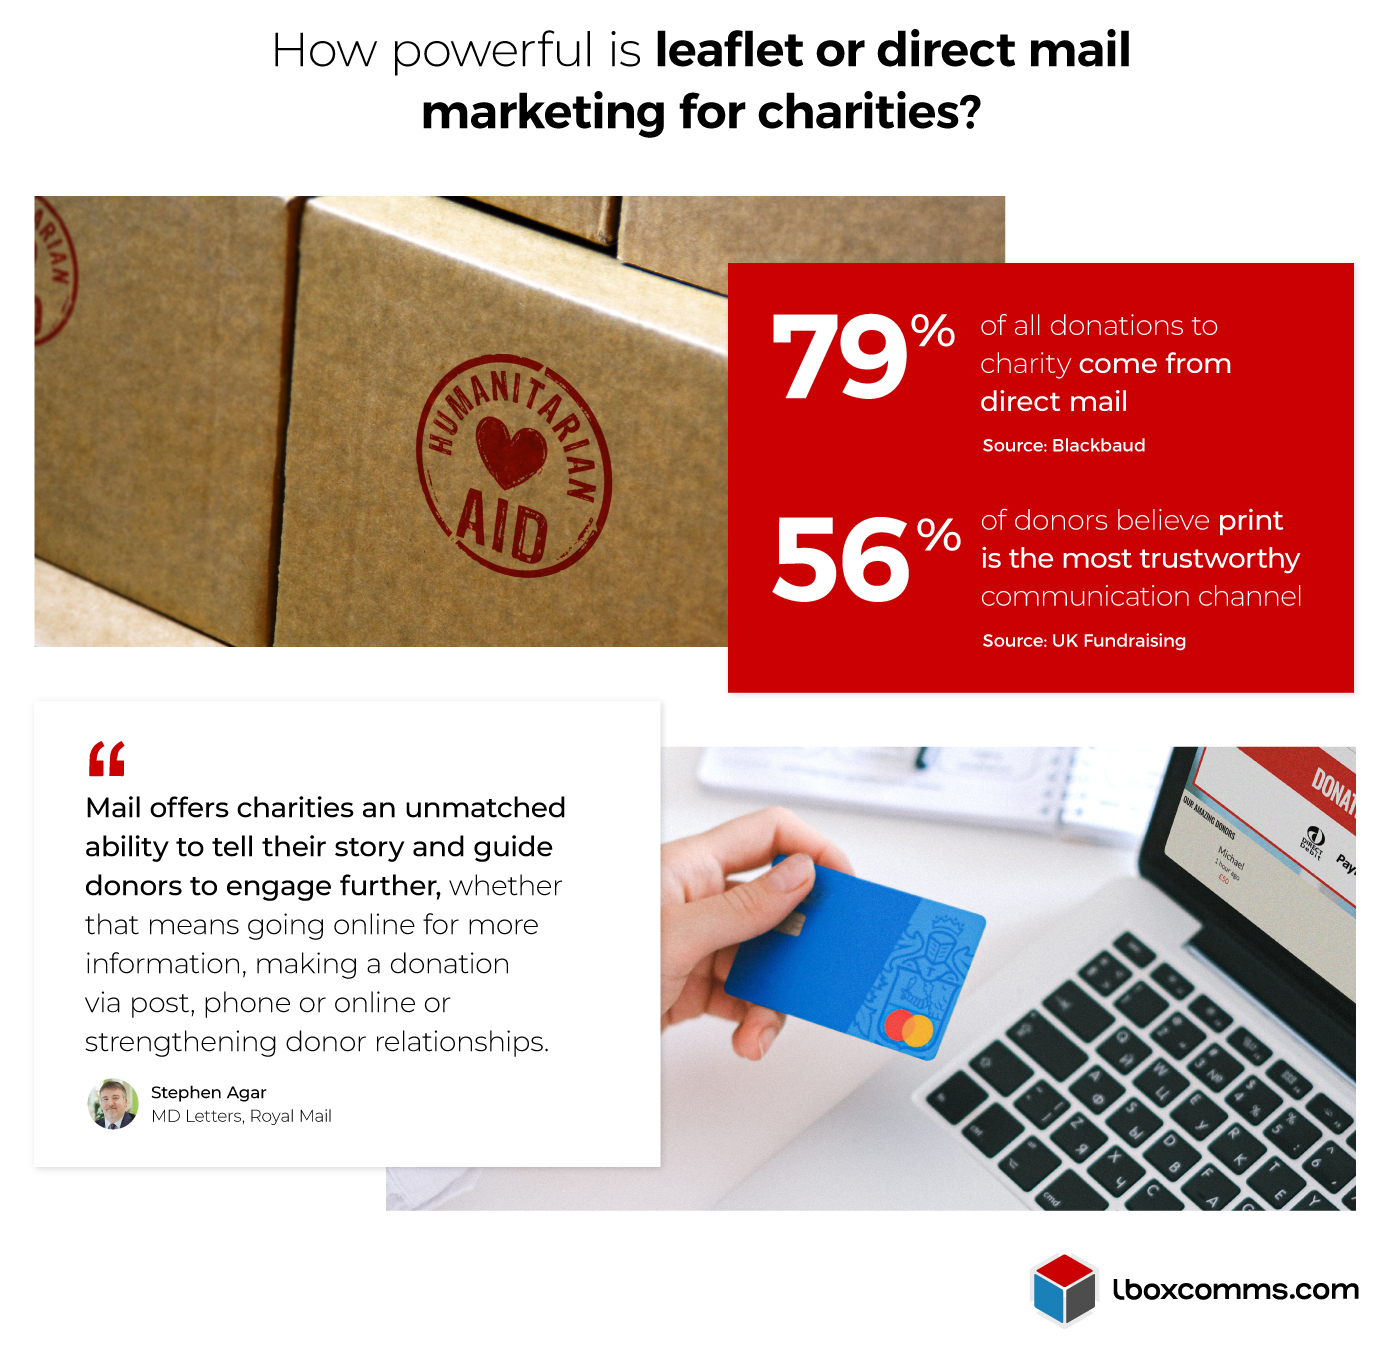 The power of leaflet campaigns and direct mail marketing for charities - Infographic stats